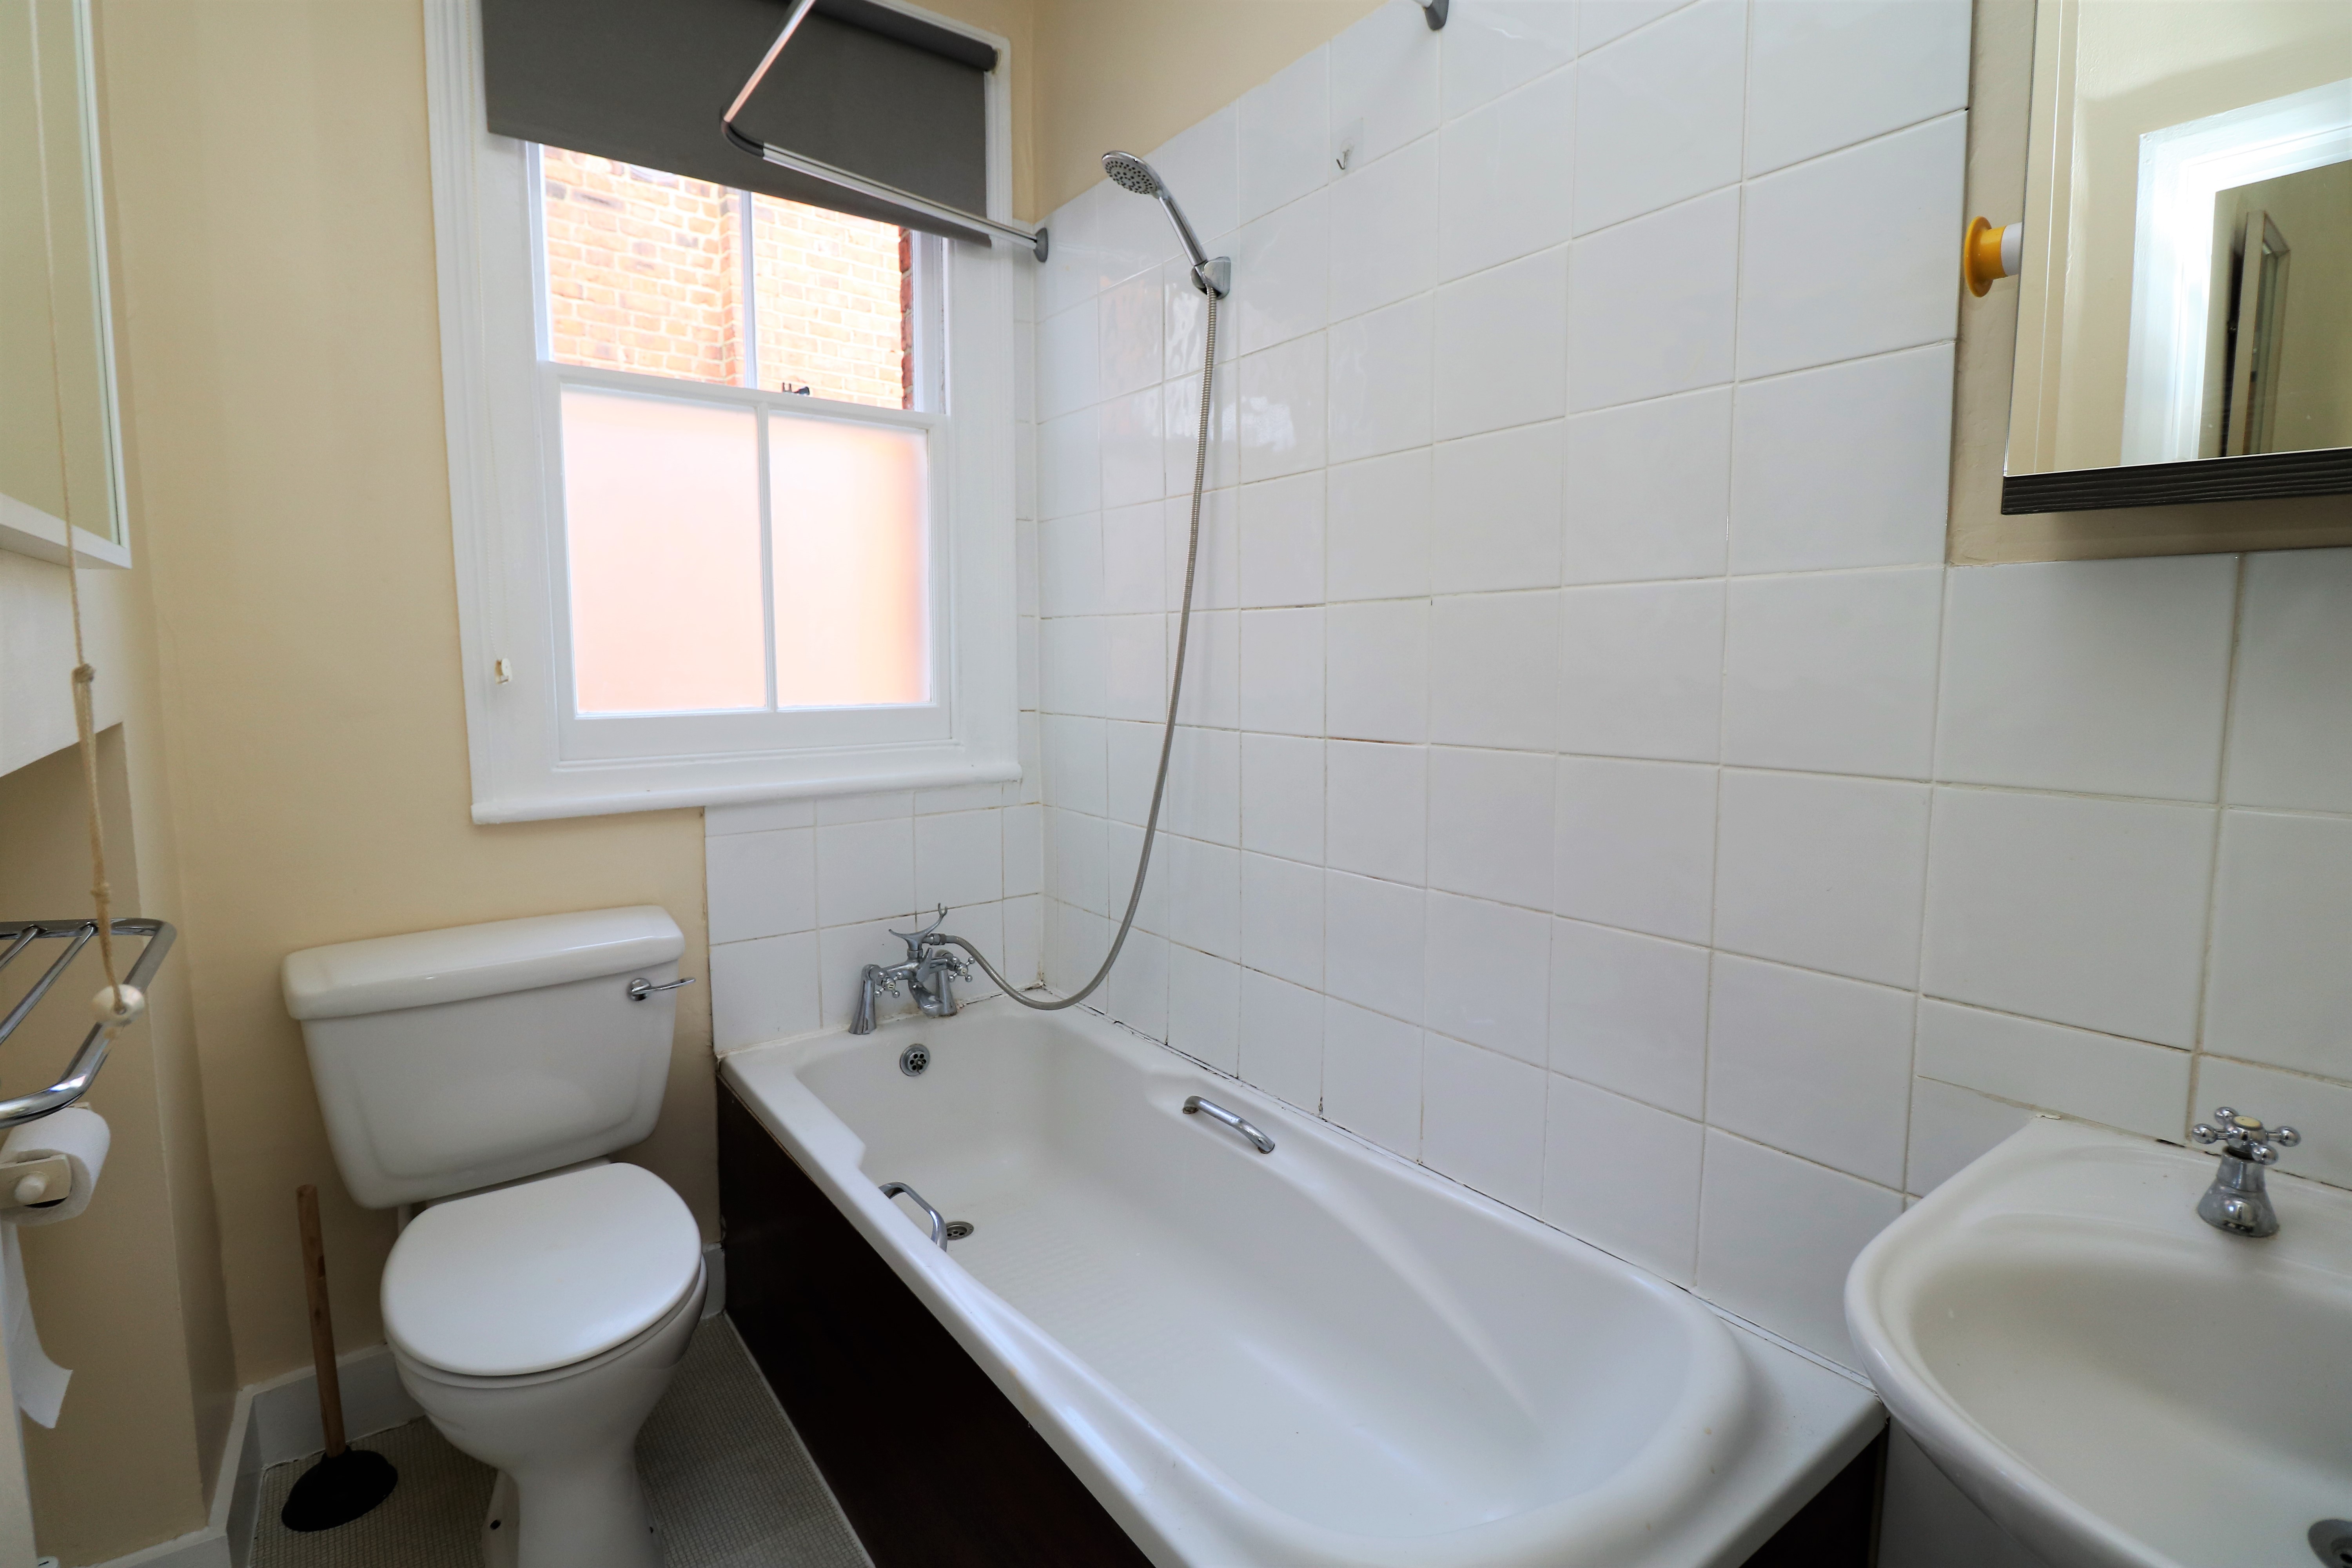 Top floor split level one bedroom flat in N8 near Crouch End and Turnpike Lane